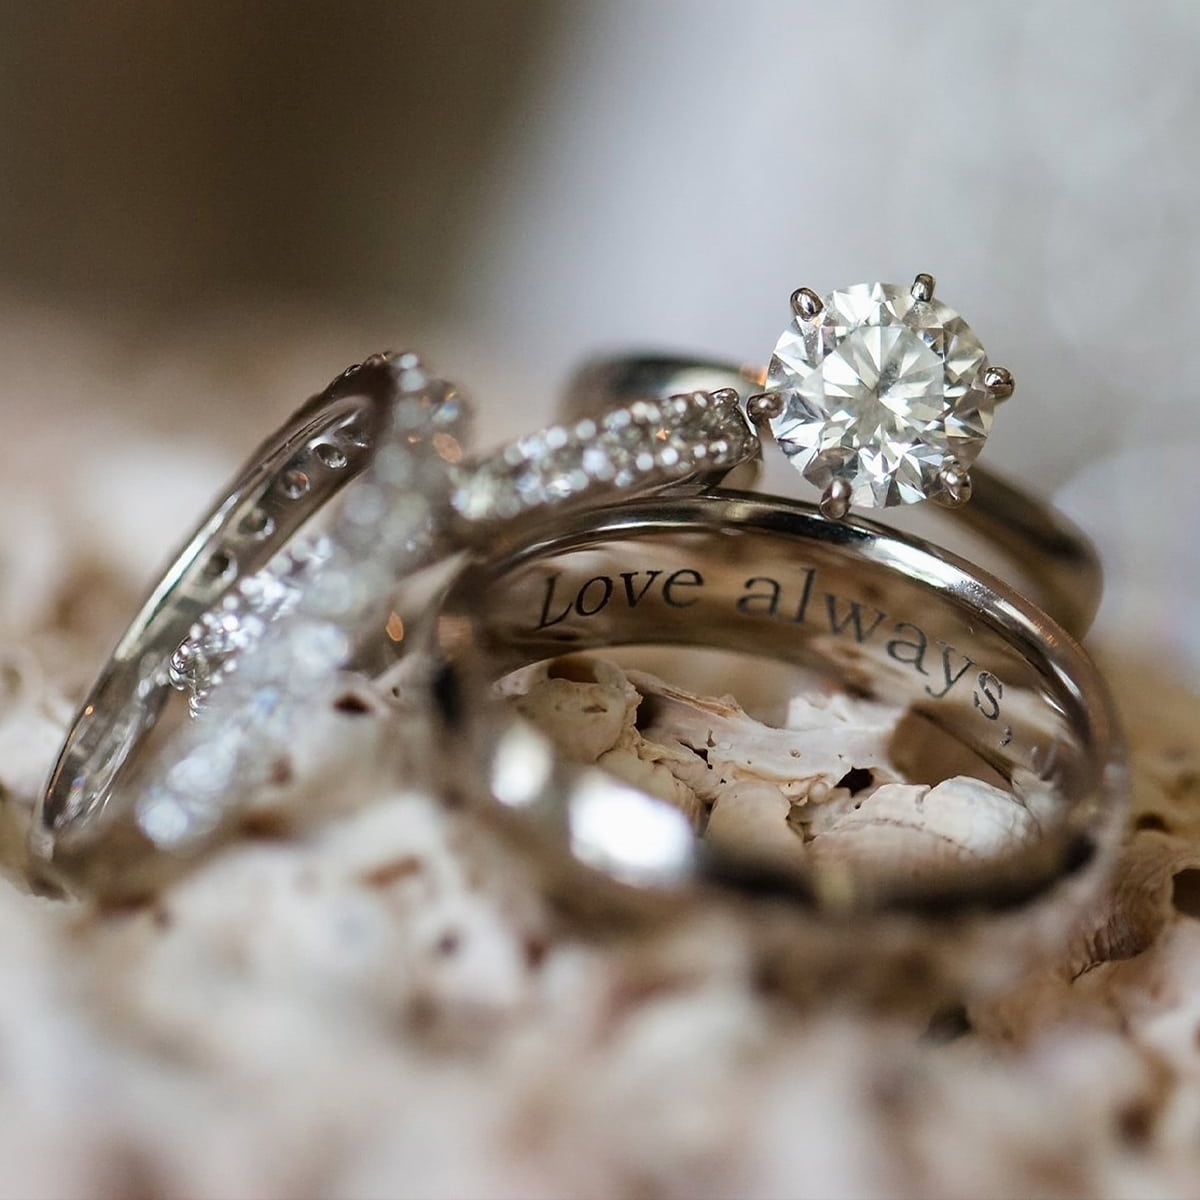 How to Find Your Dream Bespoke Engagement Ring - Absolutely Magazines